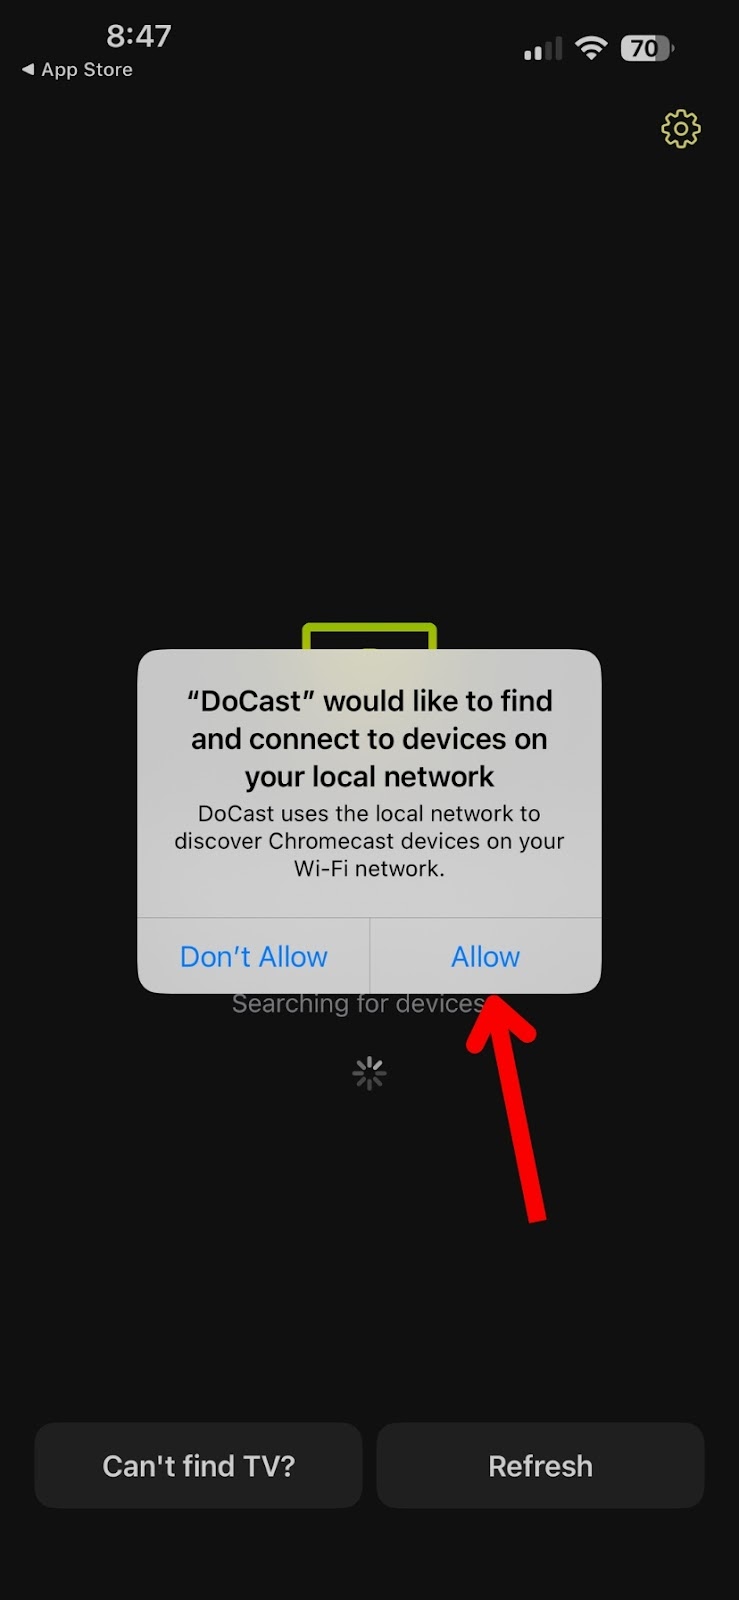 Allow DoCast to connect to devices on your local network